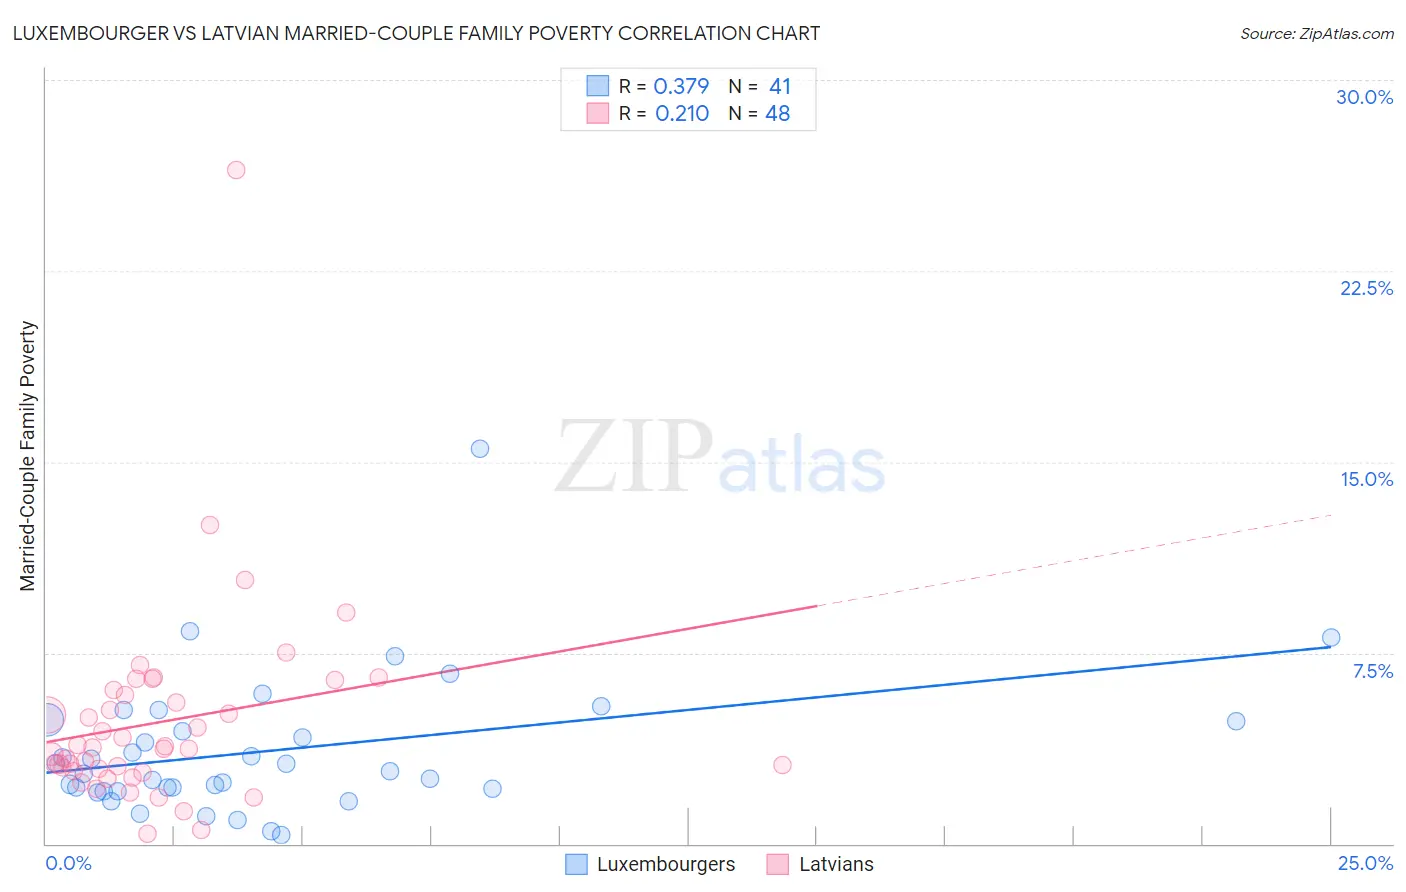 Luxembourger vs Latvian Married-Couple Family Poverty